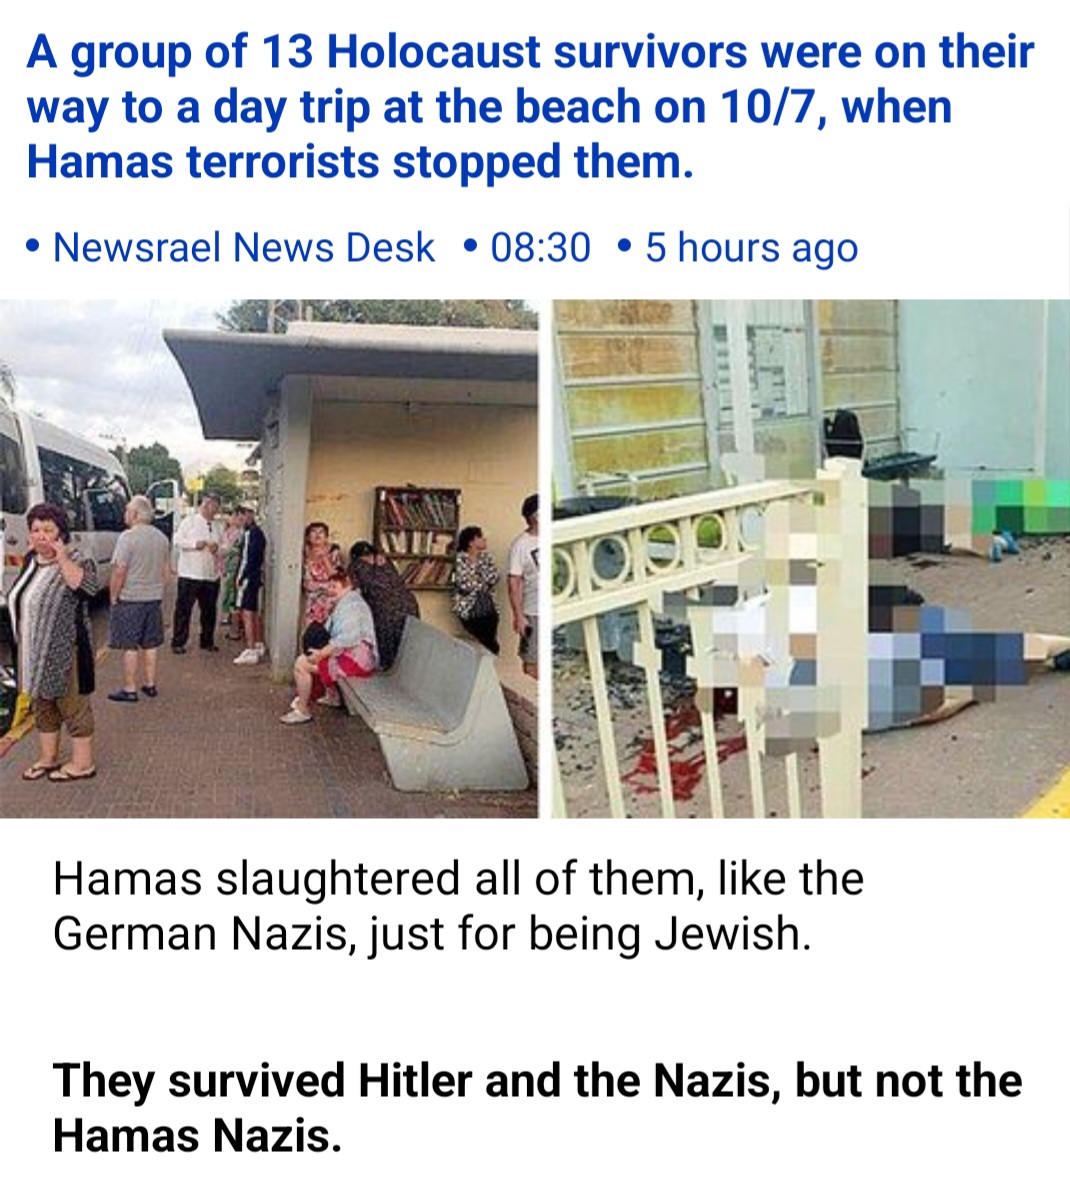 13 Holocaust survivors slaughtered at bus stop on October 7 - They survived Hitler and the Nazis, but not the Hamas Nazis